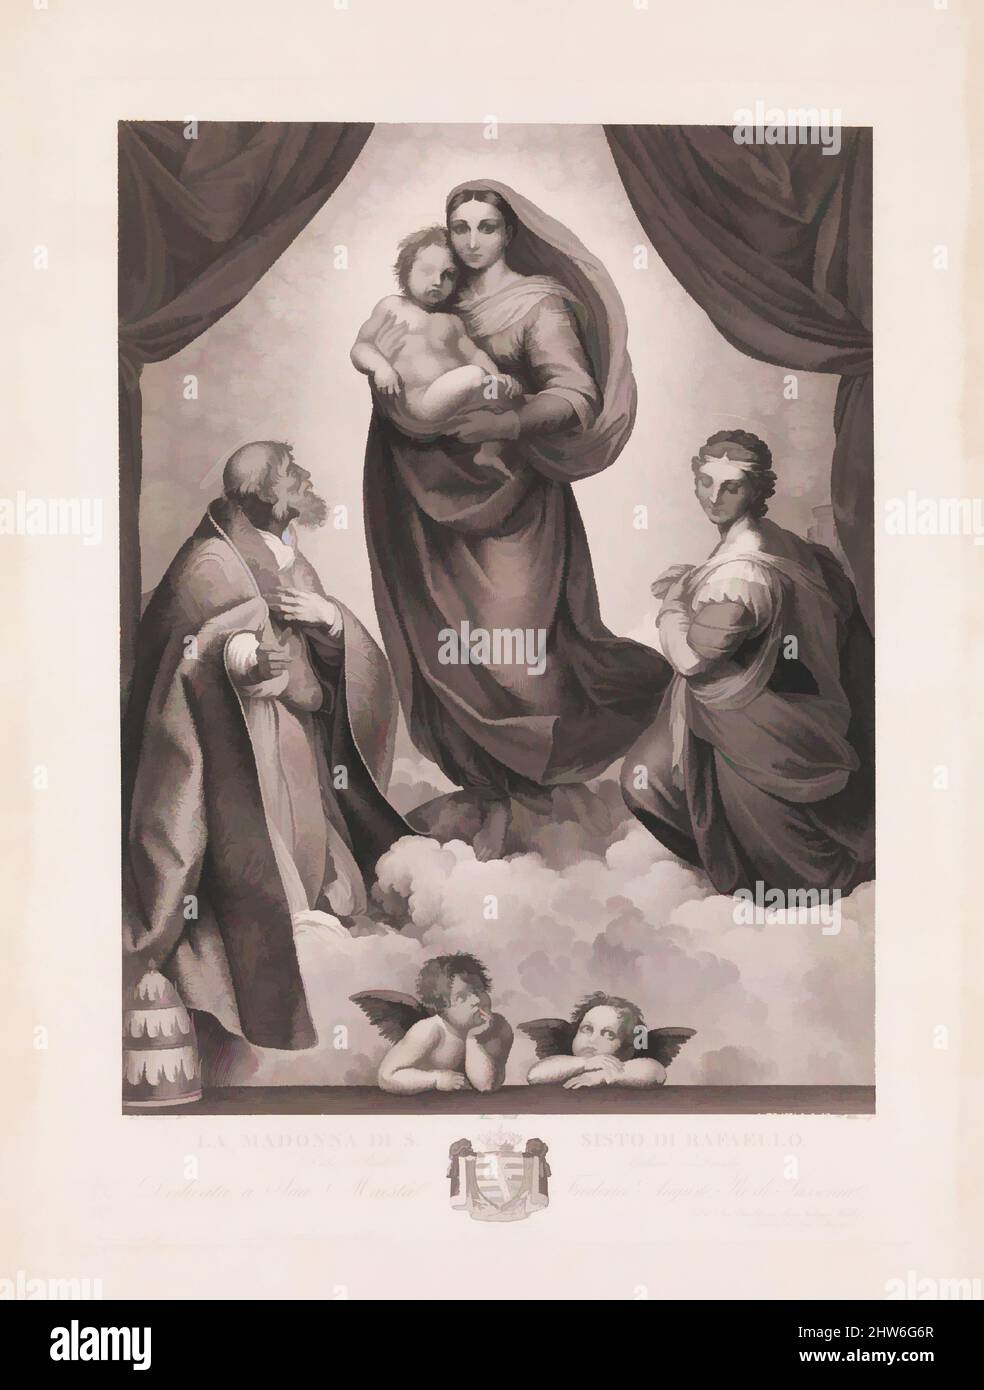 Art inspired by The Sistine Madonna, n.d., Etching and engraving; fourth state of seven, plate: 30 1/4 x 22 in. (76.8 x 55.9 cm), Prints, Johann Friedrich Wilhelm Müller (German, 1782–1816), After Raphael (Raffaello Sanzio or Santi) (Italian, Urbino 1483–1520 Rome, Classic works modernized by Artotop with a splash of modernity. Shapes, color and value, eye-catching visual impact on art. Emotions through freedom of artworks in a contemporary way. A timeless message pursuing a wildly creative new direction. Artists turning to the digital medium and creating the Artotop NFT Stock Photo